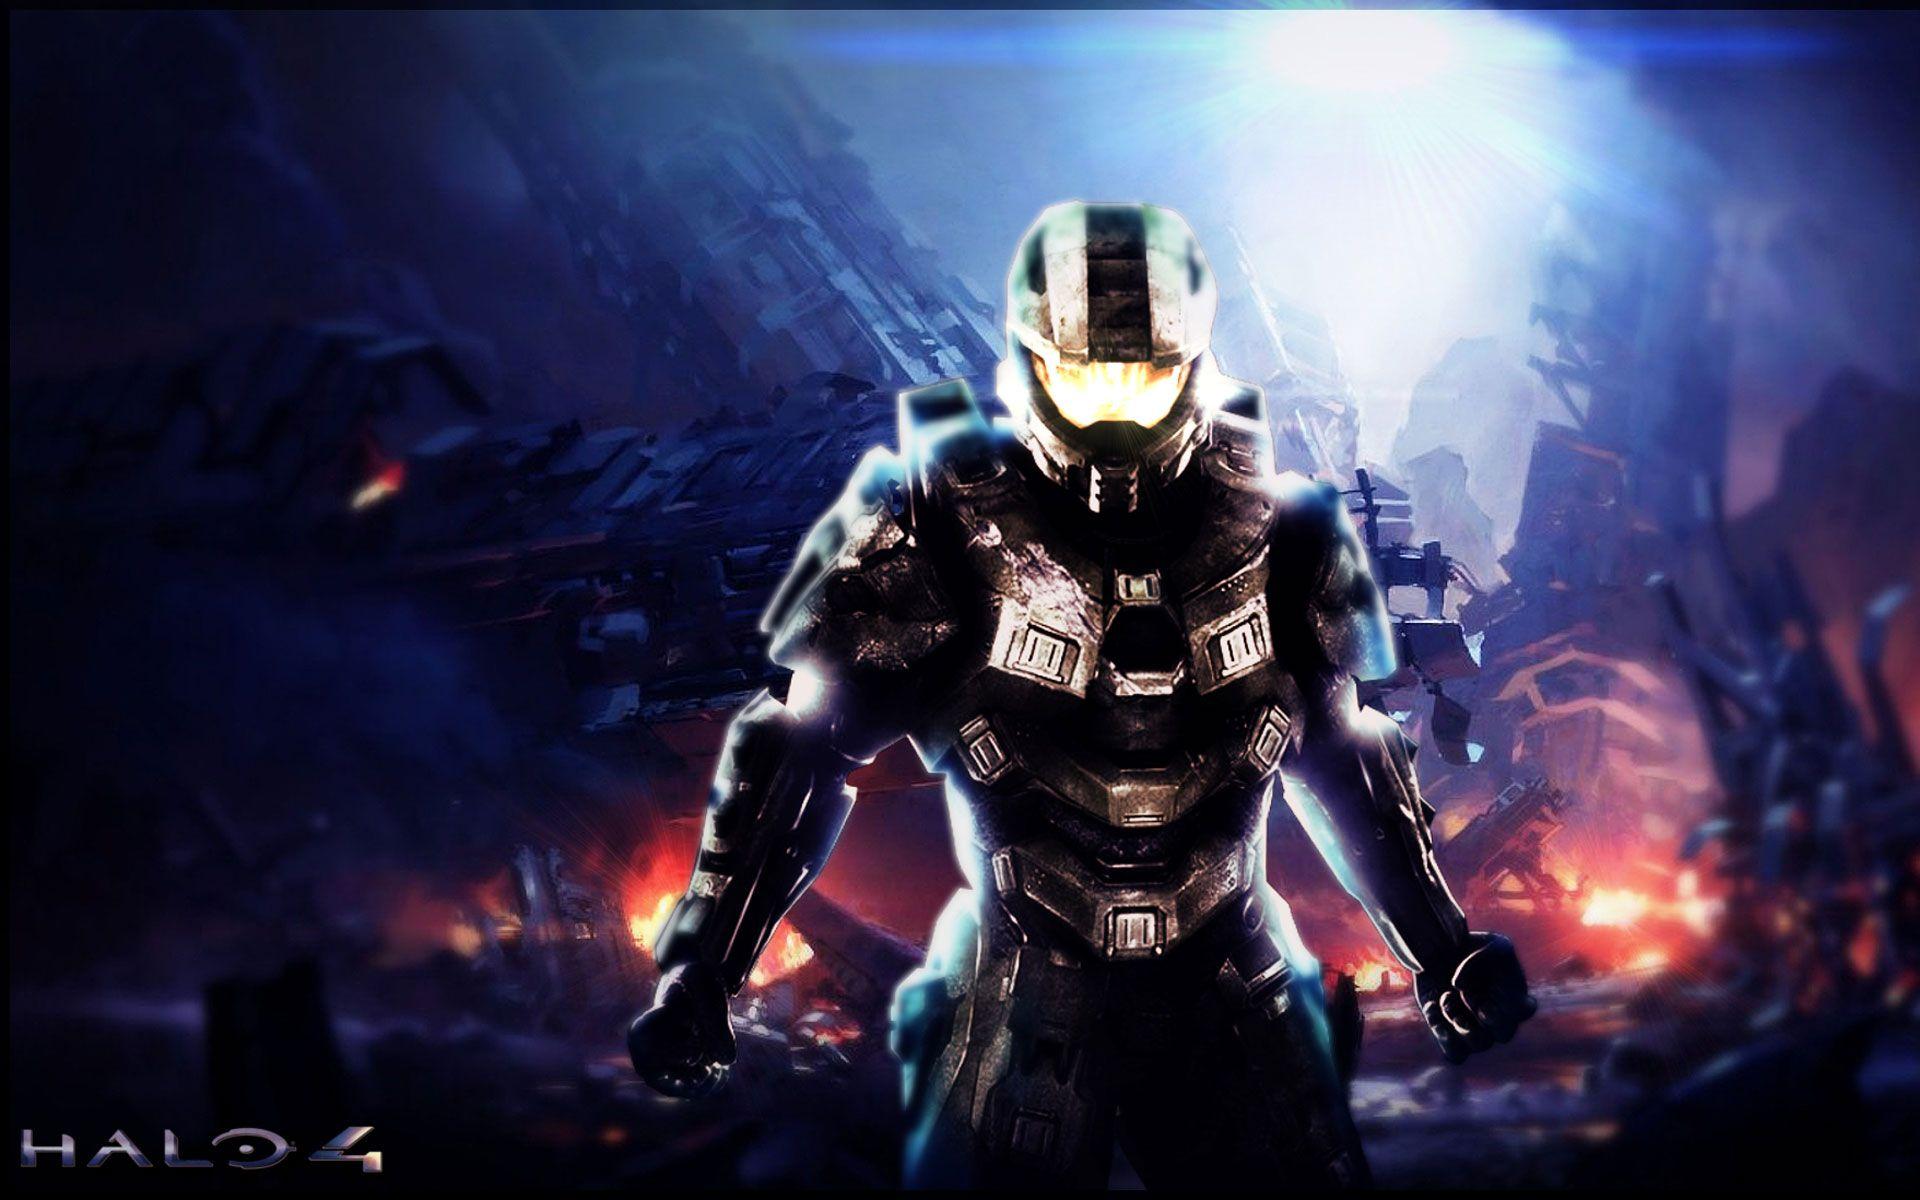 Wallpaper.wiki Halo 4 HD Background PIC WPE005762